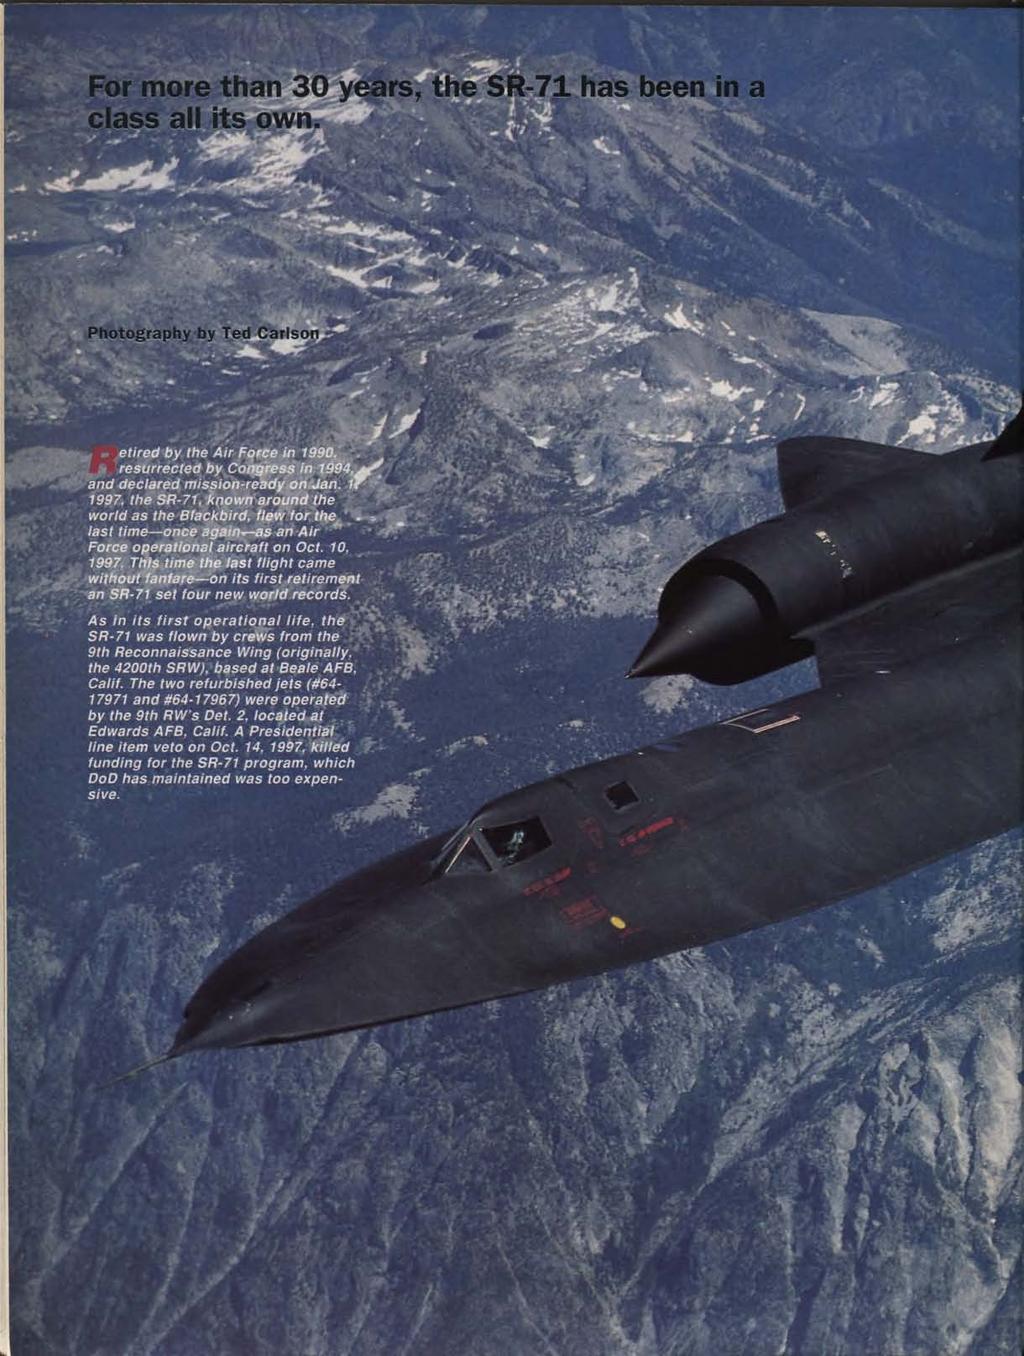 For more than 30 years the SR-71 has been in a c ss II its own ehred by the Air Force in 1990. resurrected by Congress in 1994,e and declared mission-ready on Jan. 1 1997. the SR-71. known around the world as the Blackbird, flew for the last time once again as an Air Force operational aircraft on Oct.